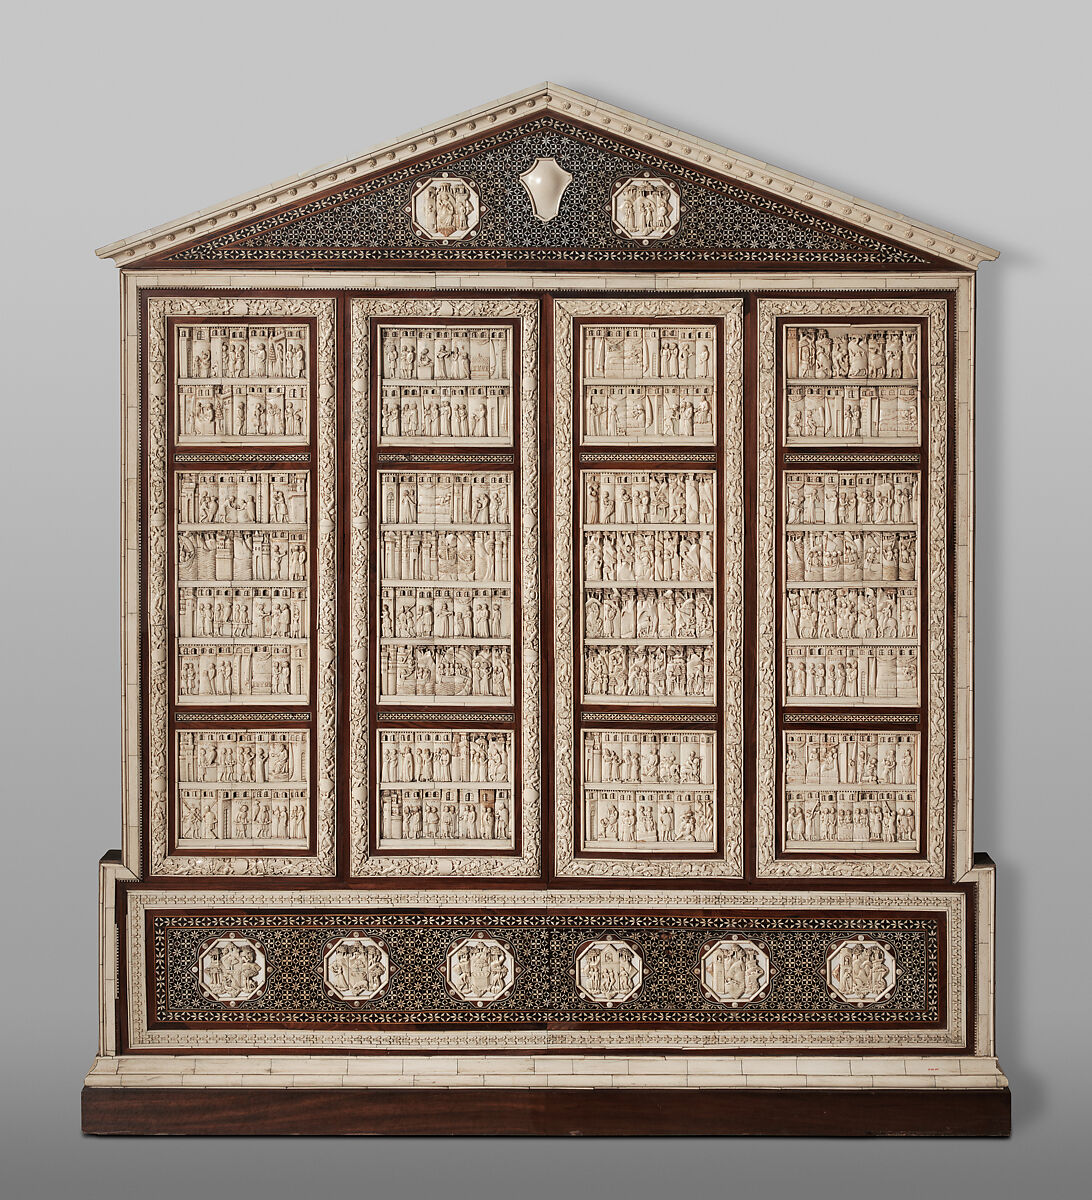 Cabinet frontal with panels from two Embriachi caskets, Baldassare degli Embriachi (Italian, active 1390–1409) (Workshop), Bone and Certosina (inlays of stained woods, bone and horn) with traces of gilding, Italian 